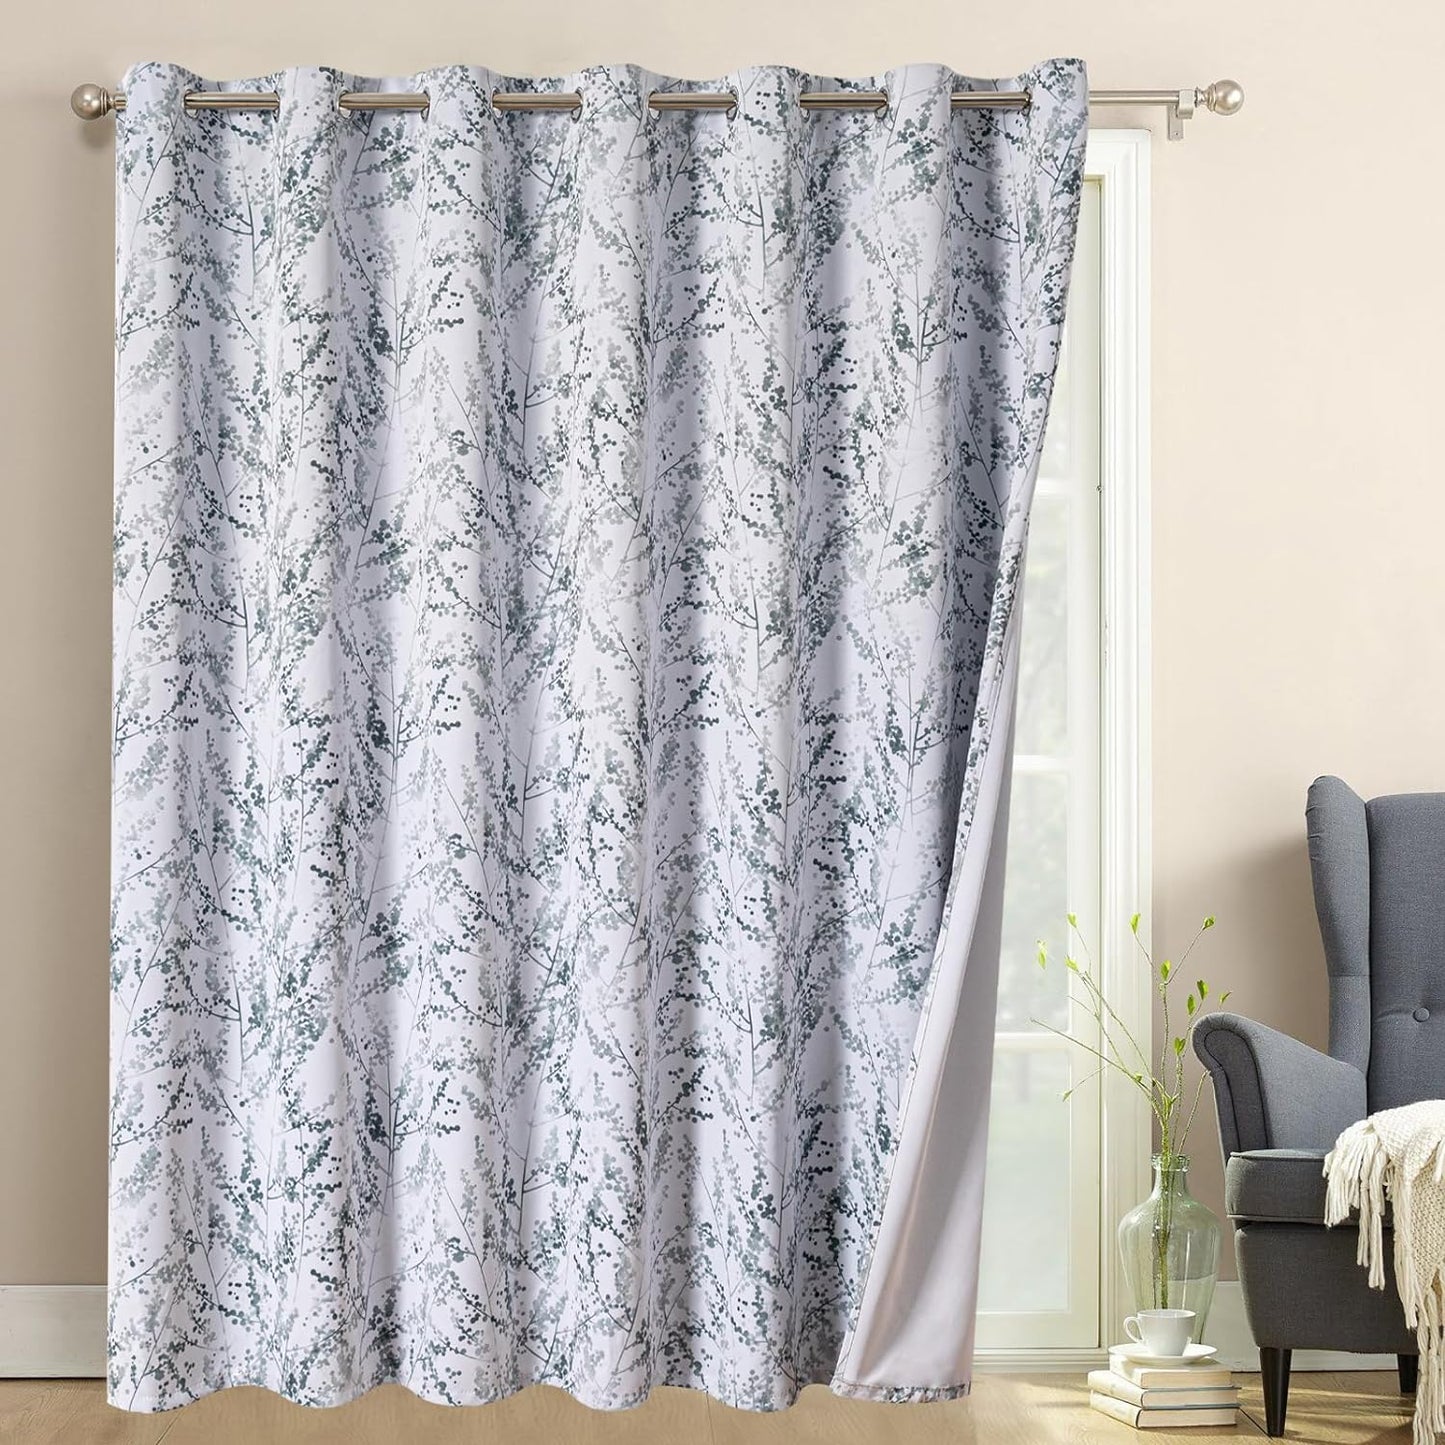 MYSKY HOME Living Room Curtains 84 Inches Long Thermal Insulated Room Darkening Curtains for Dining Room Patio Leaf Pattern Grommet Drapes for Bedroom, Sage, 2 Pieces  MYSKY HOME Branch-Grey And Black 100"W X 84"L 